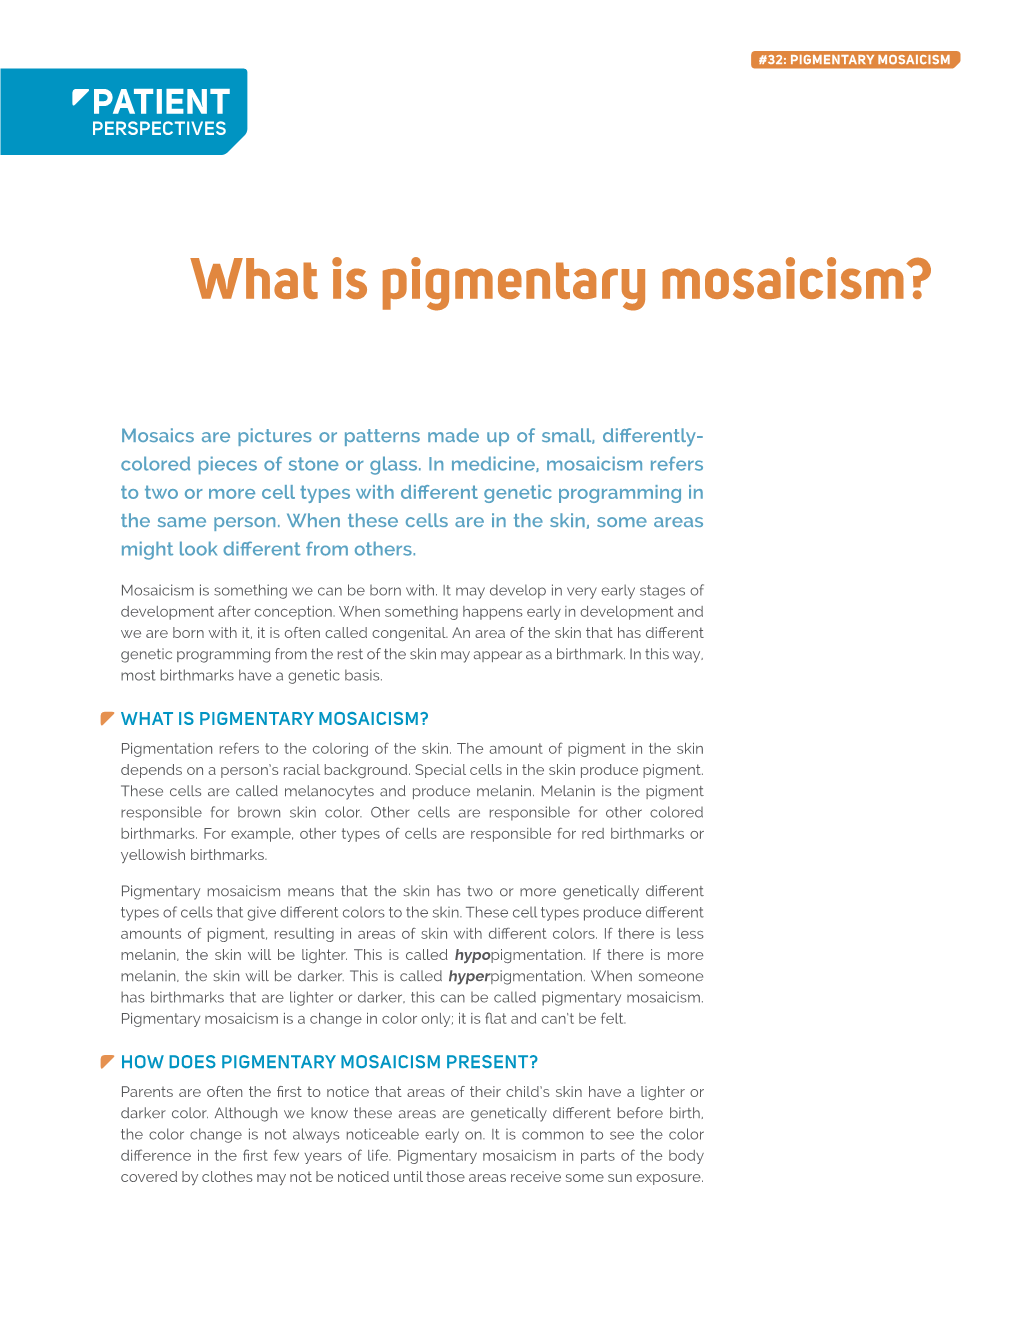 What Is Pigmentary Mosaicism?